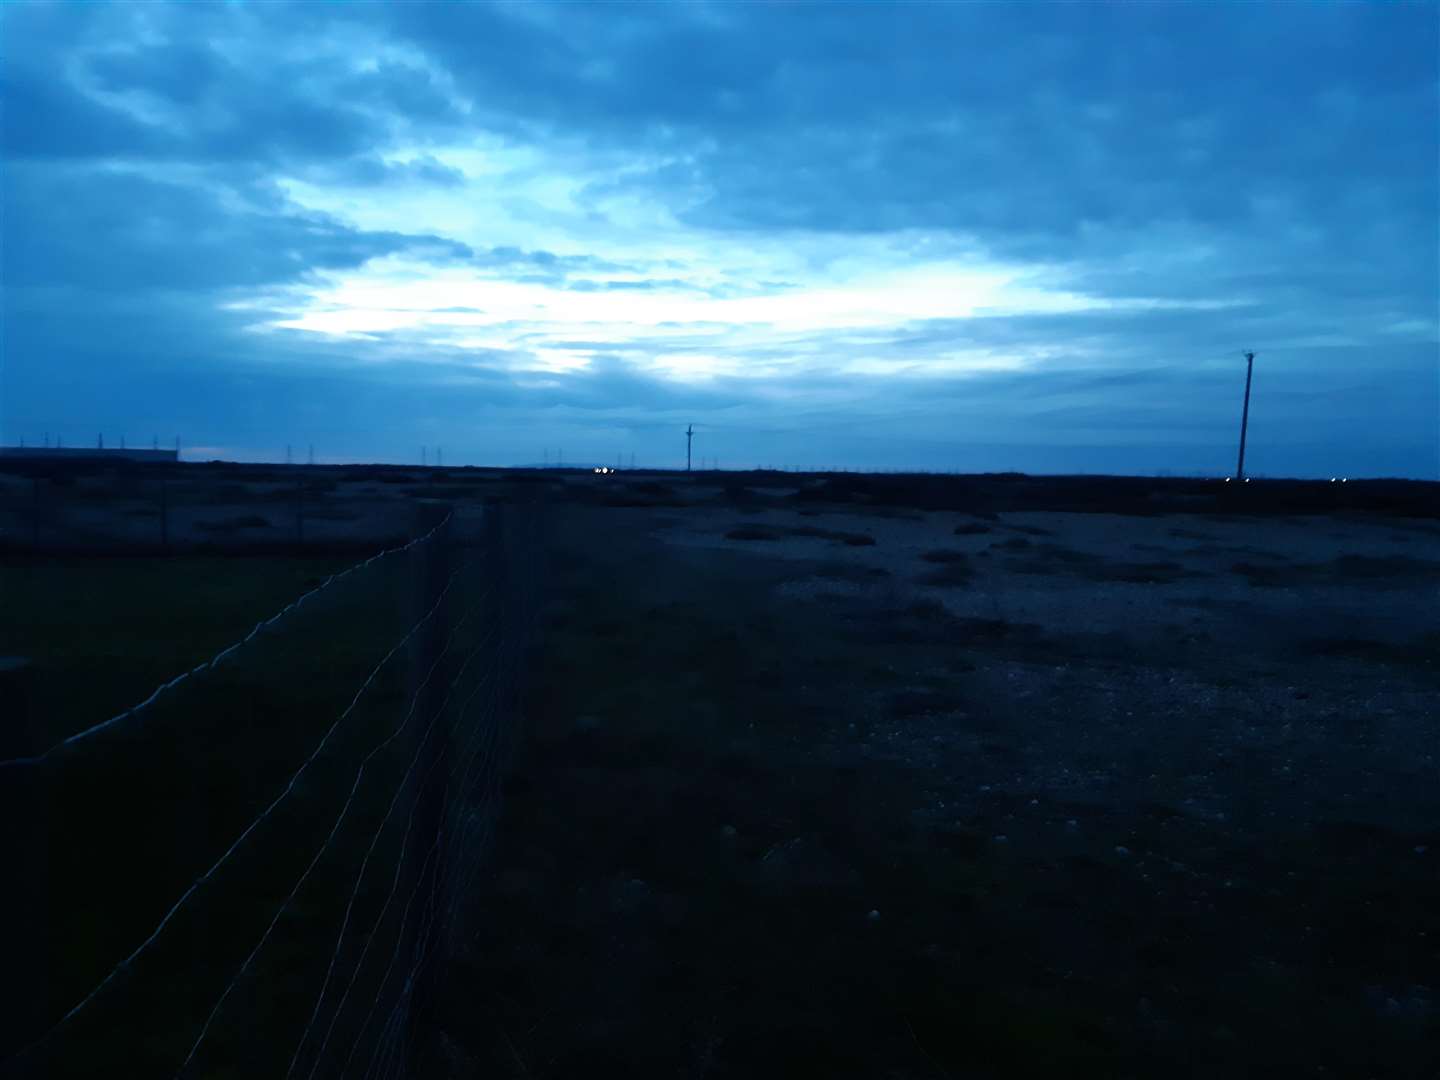 Vast open skies as the night draws in at Dungeness (6775341)